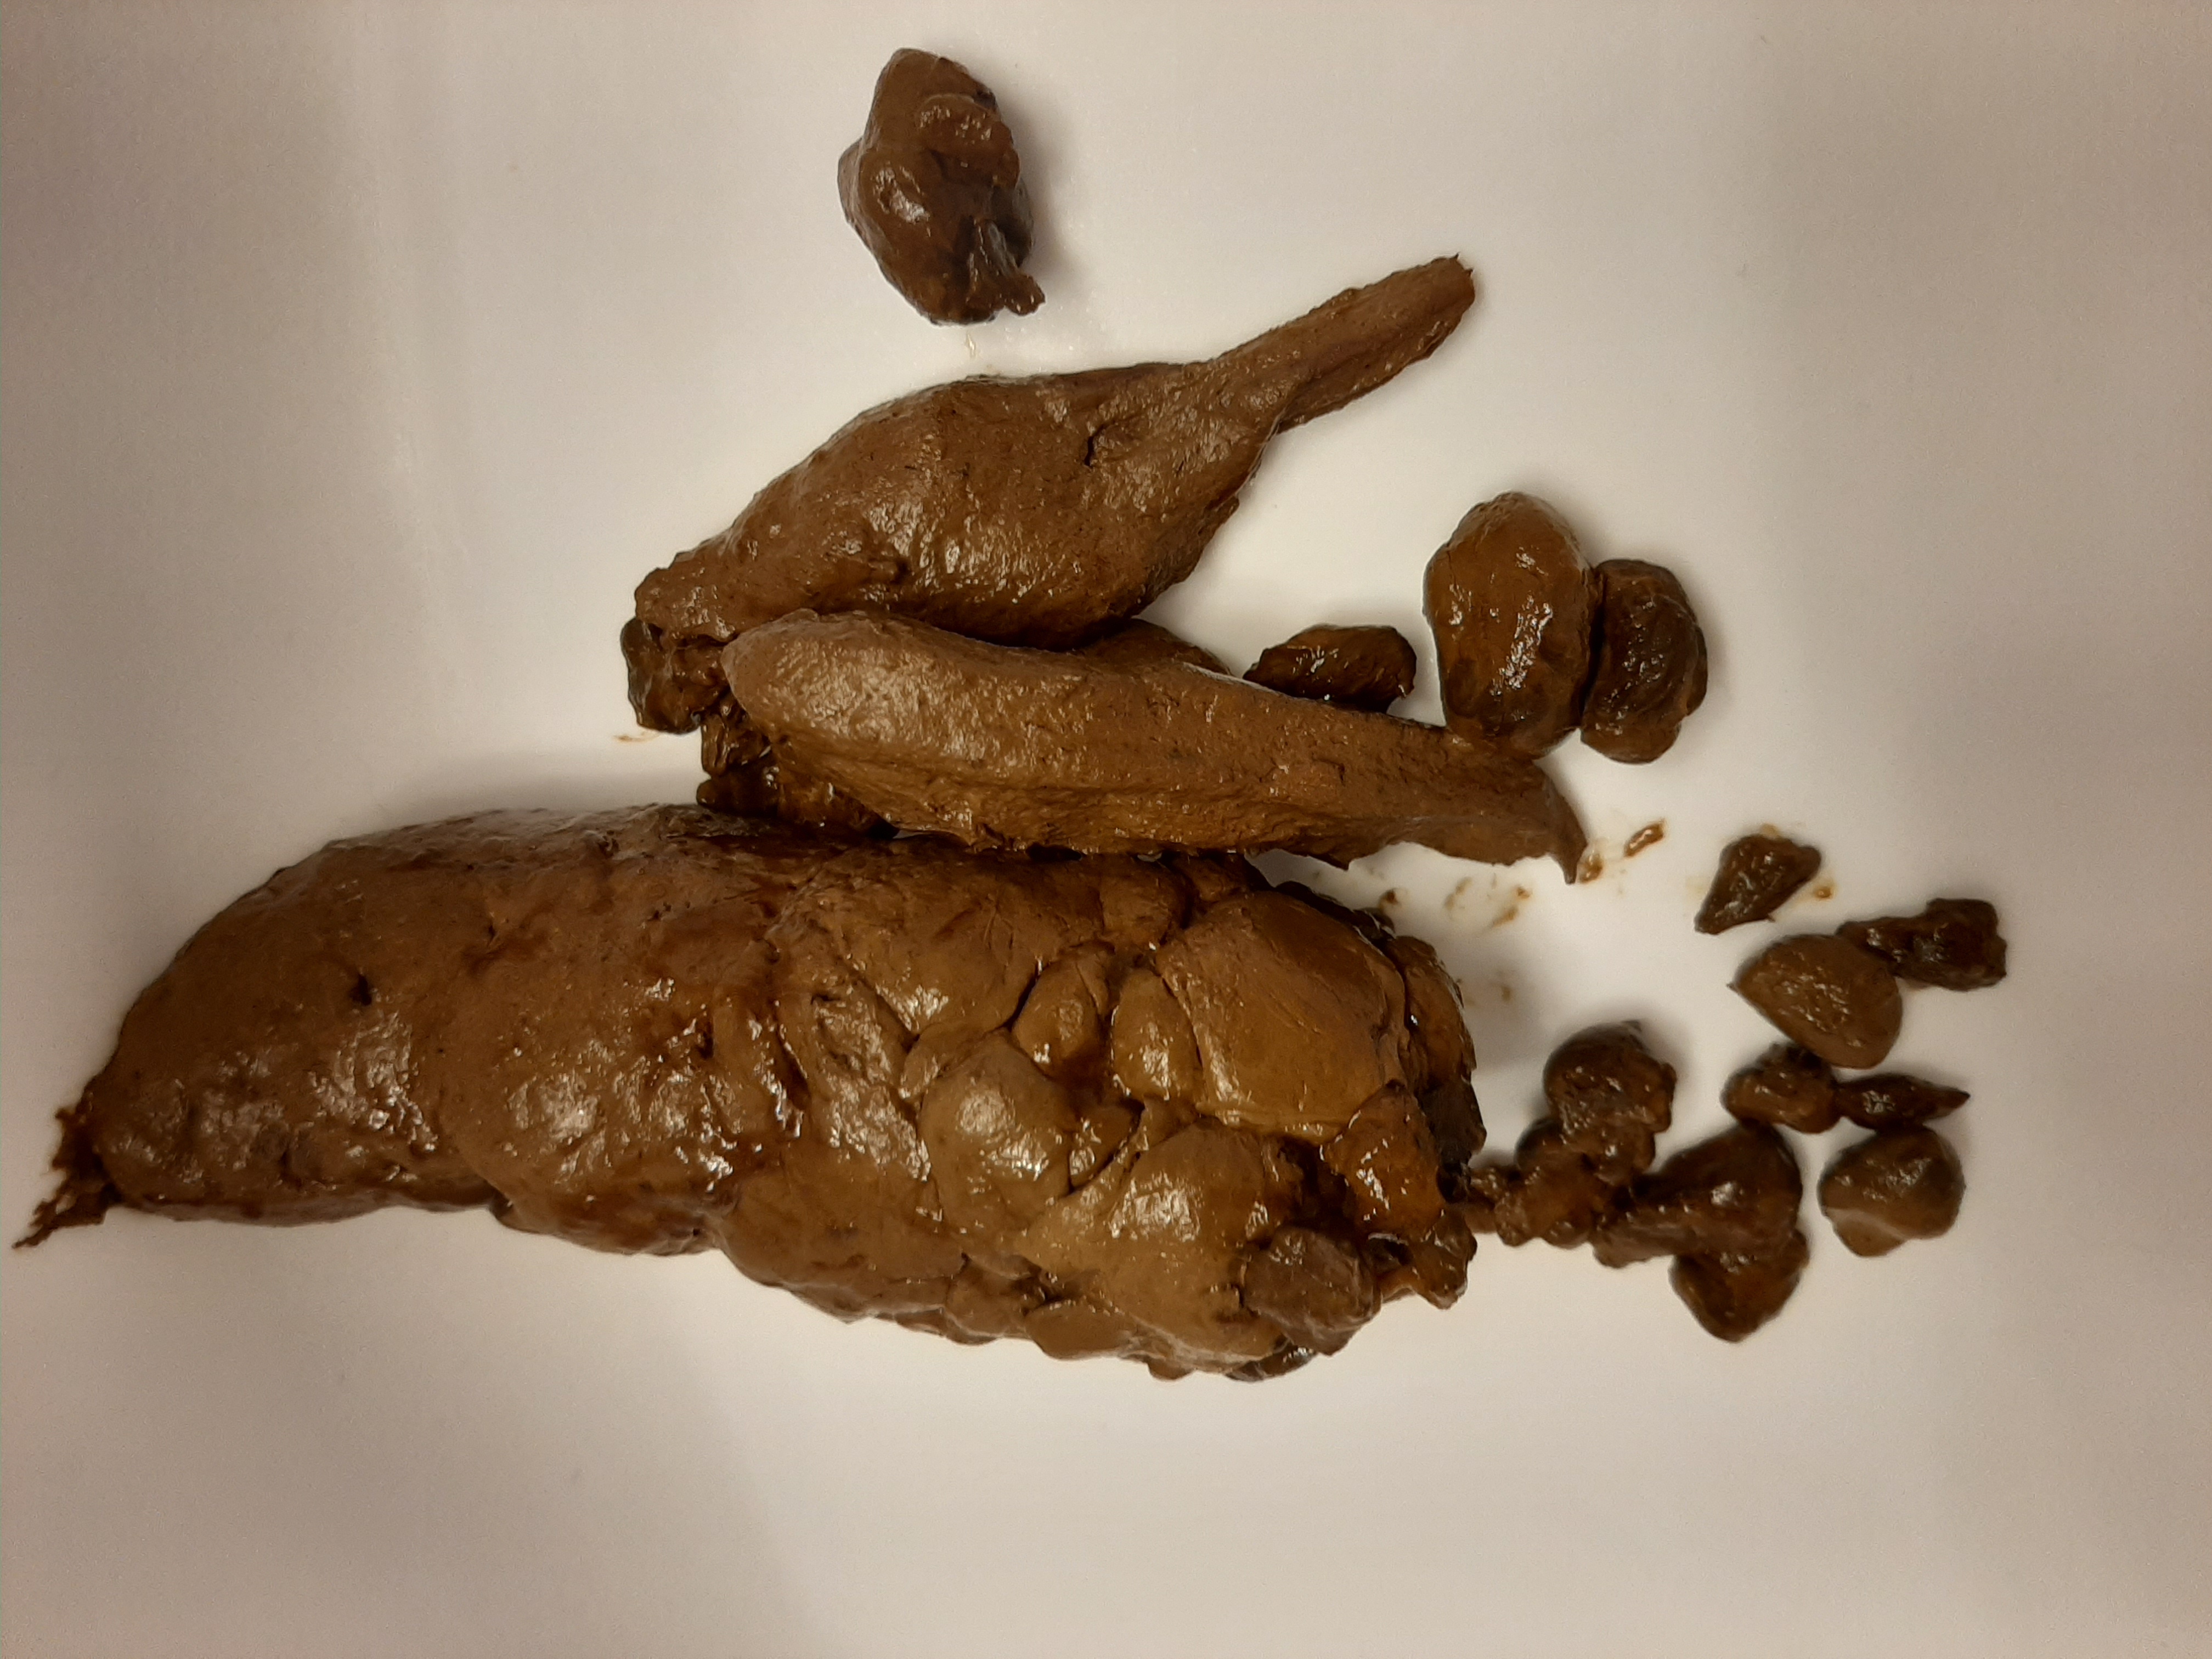 Turd nuggets for you to swallow one by one. Then attempt the log!